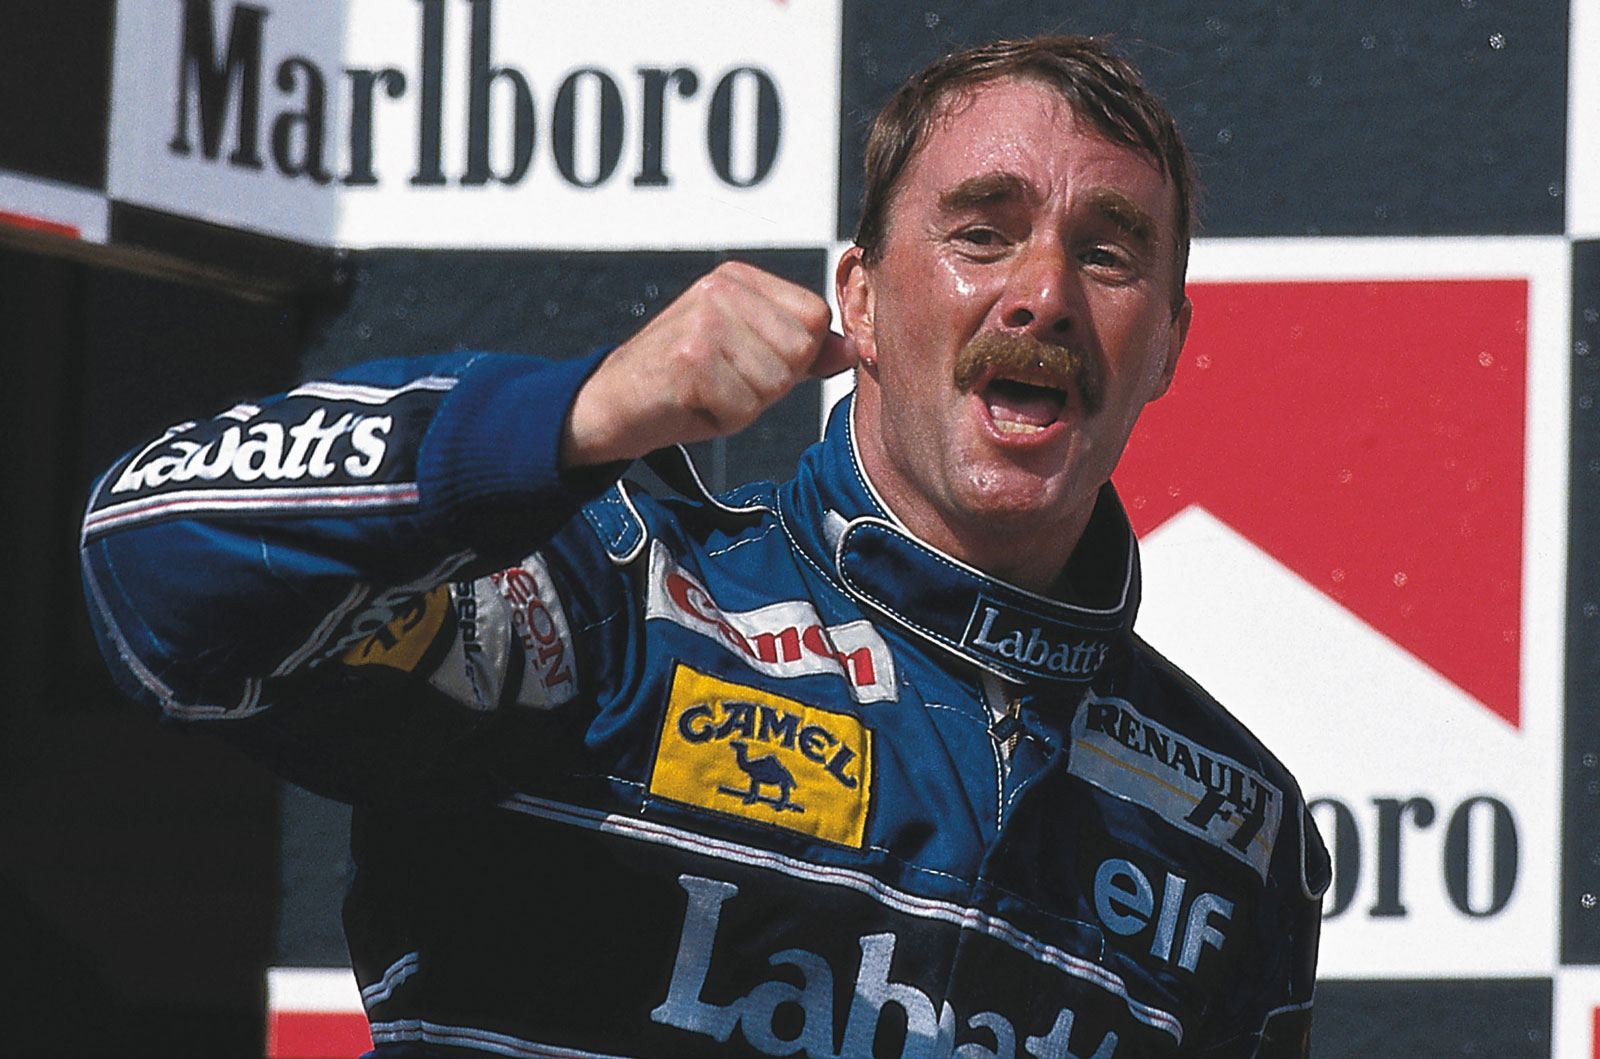 psychologie Keelholte Plicht On this day in 1992: Nigel Mansell wins his first Formula 1 title | Autocar